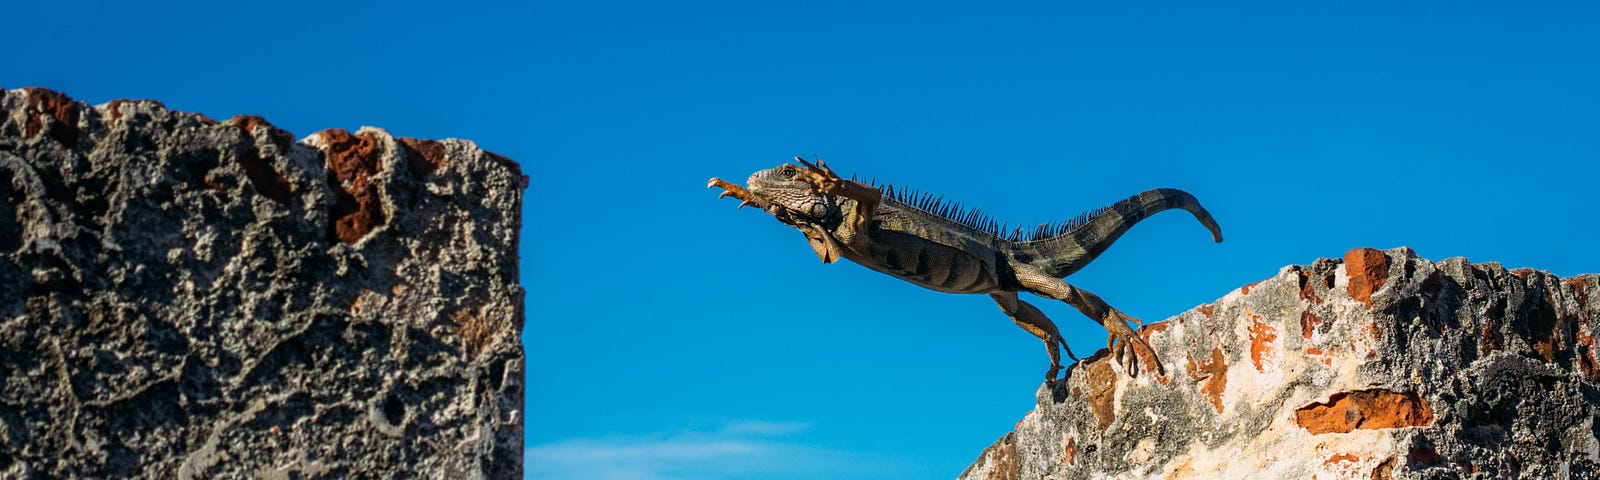 A lizard leaping between two walls with a blue sky in the background.